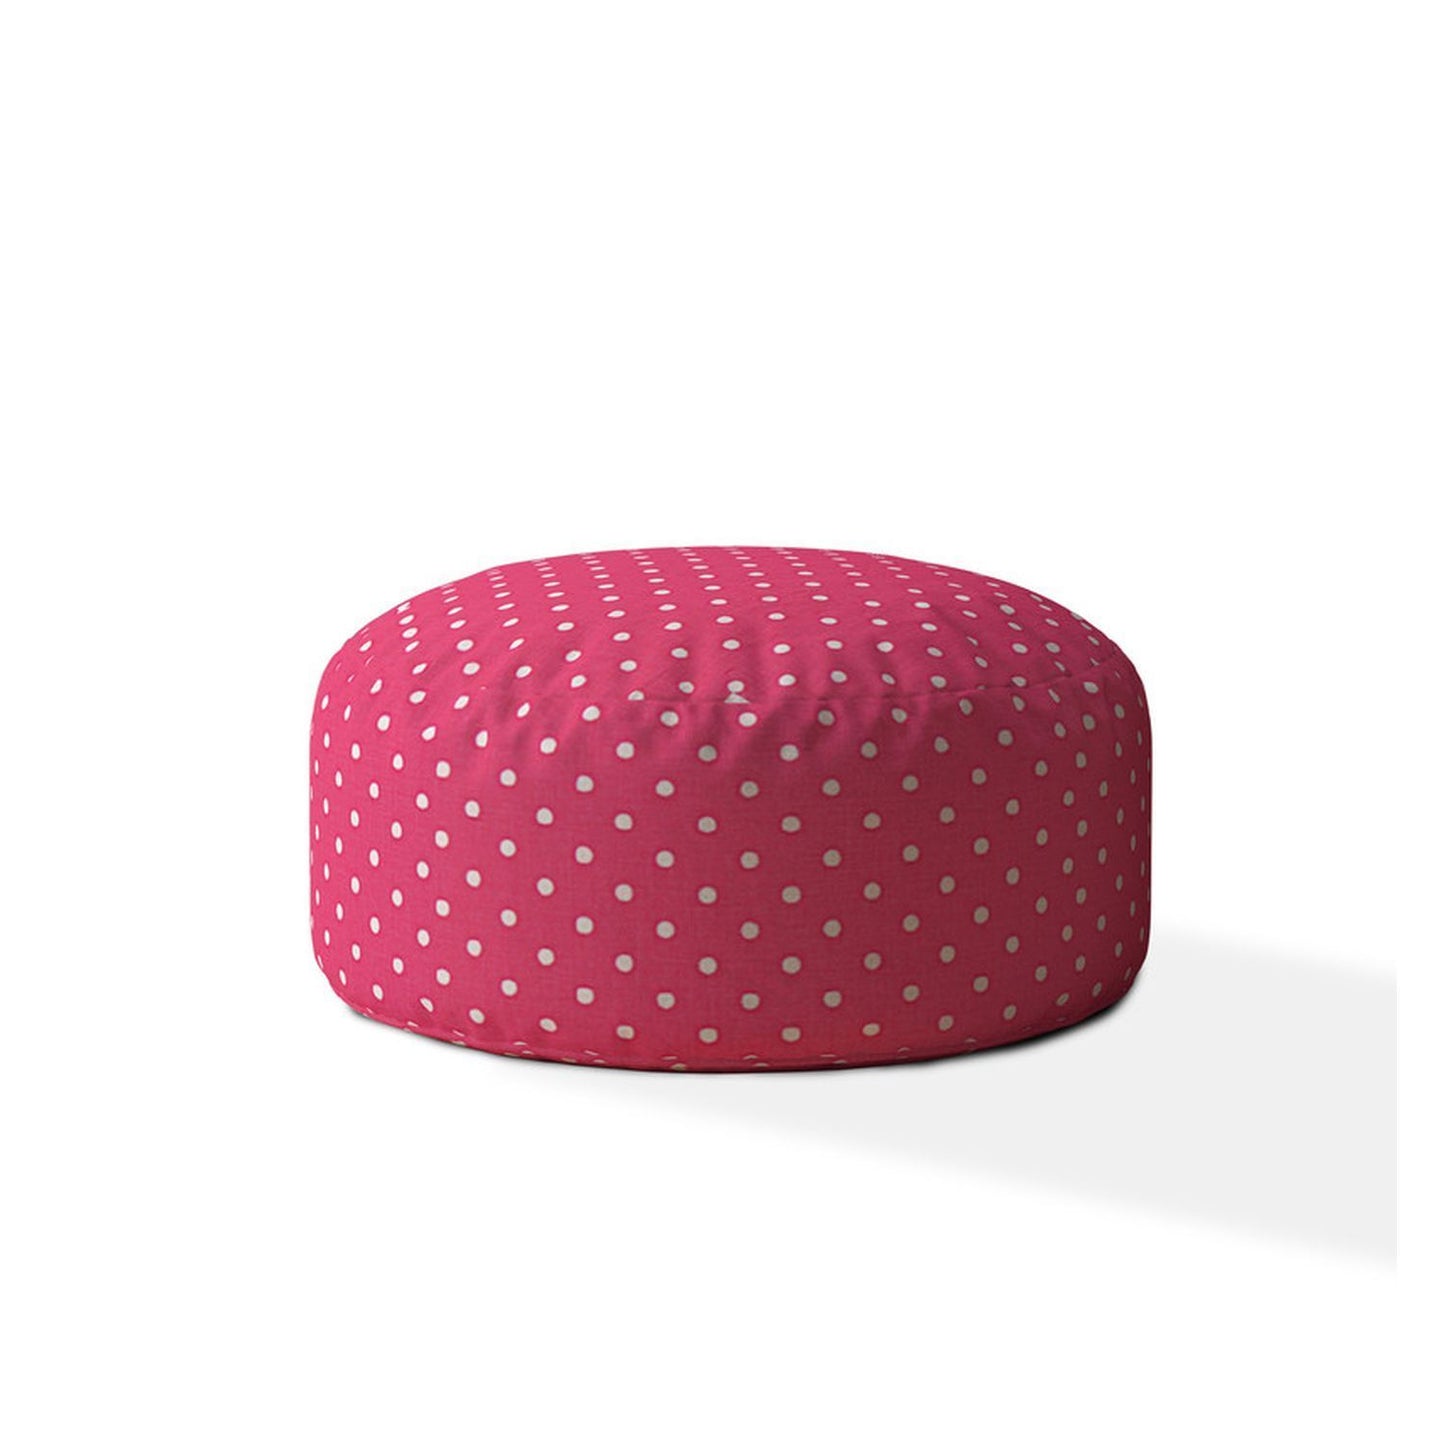 Indoor DINER DOT Hot Pink/White Round Zipper Pouf - Cover Only - 24in dia x 20in tall